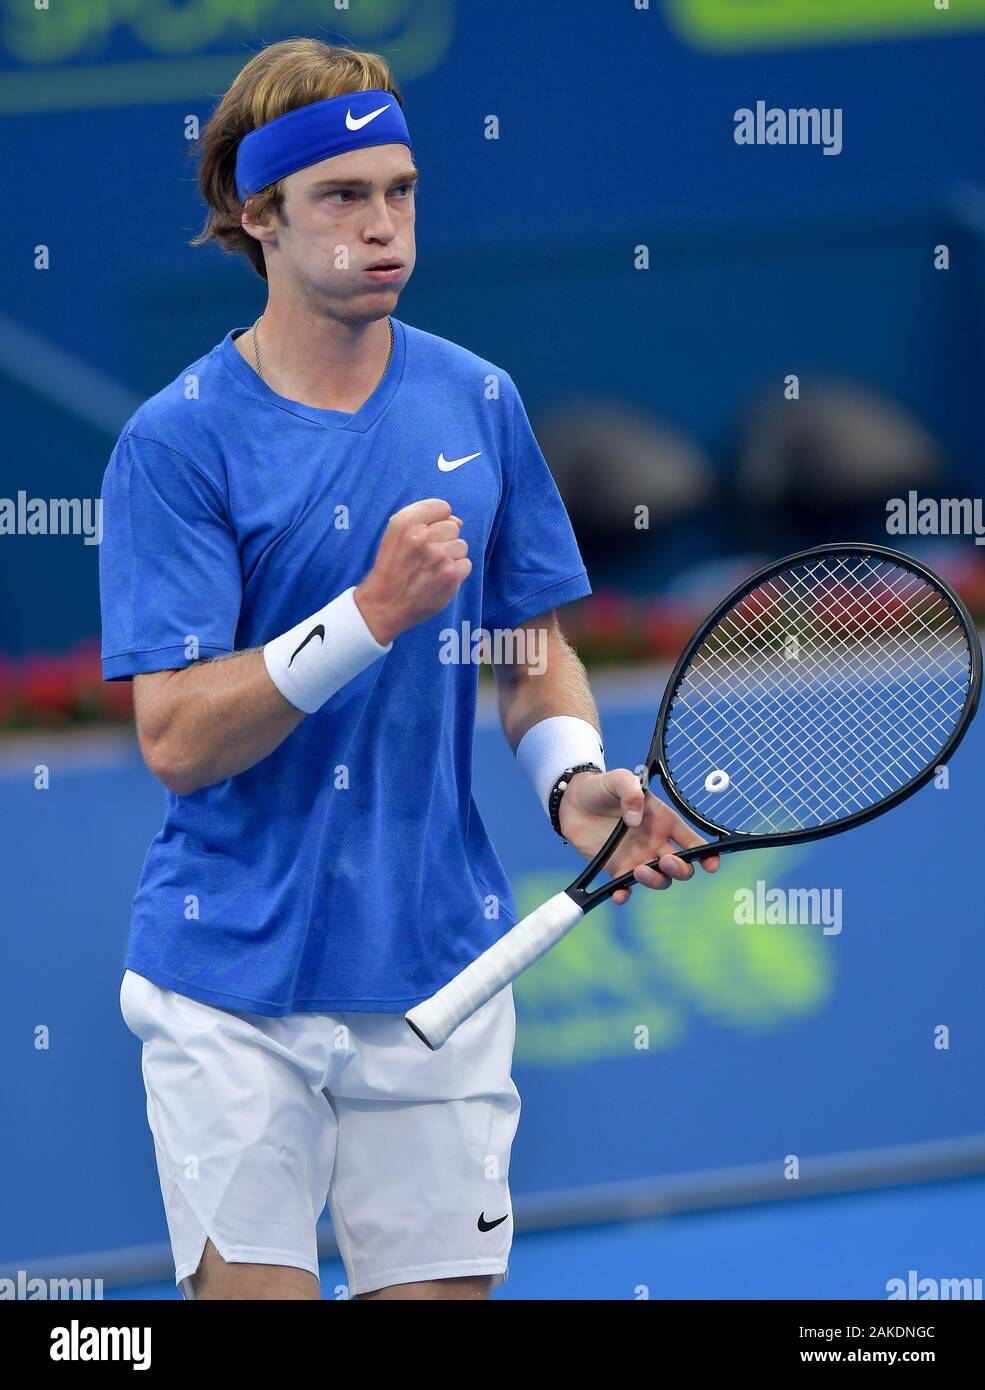 Doha, Qatar. 8th Jan, 2020. Andrey Rublev of Russia reacts during the singles second round match between Mikhail Kukushkin of Kazakistan and Andrey Rublev of Russia at ATP Qatar Open tennis tournament in Doha, capital of Qatar, Jan. 8, 2020. Credit: Nikku/Xinhua/Alamy Live News Stock Photo